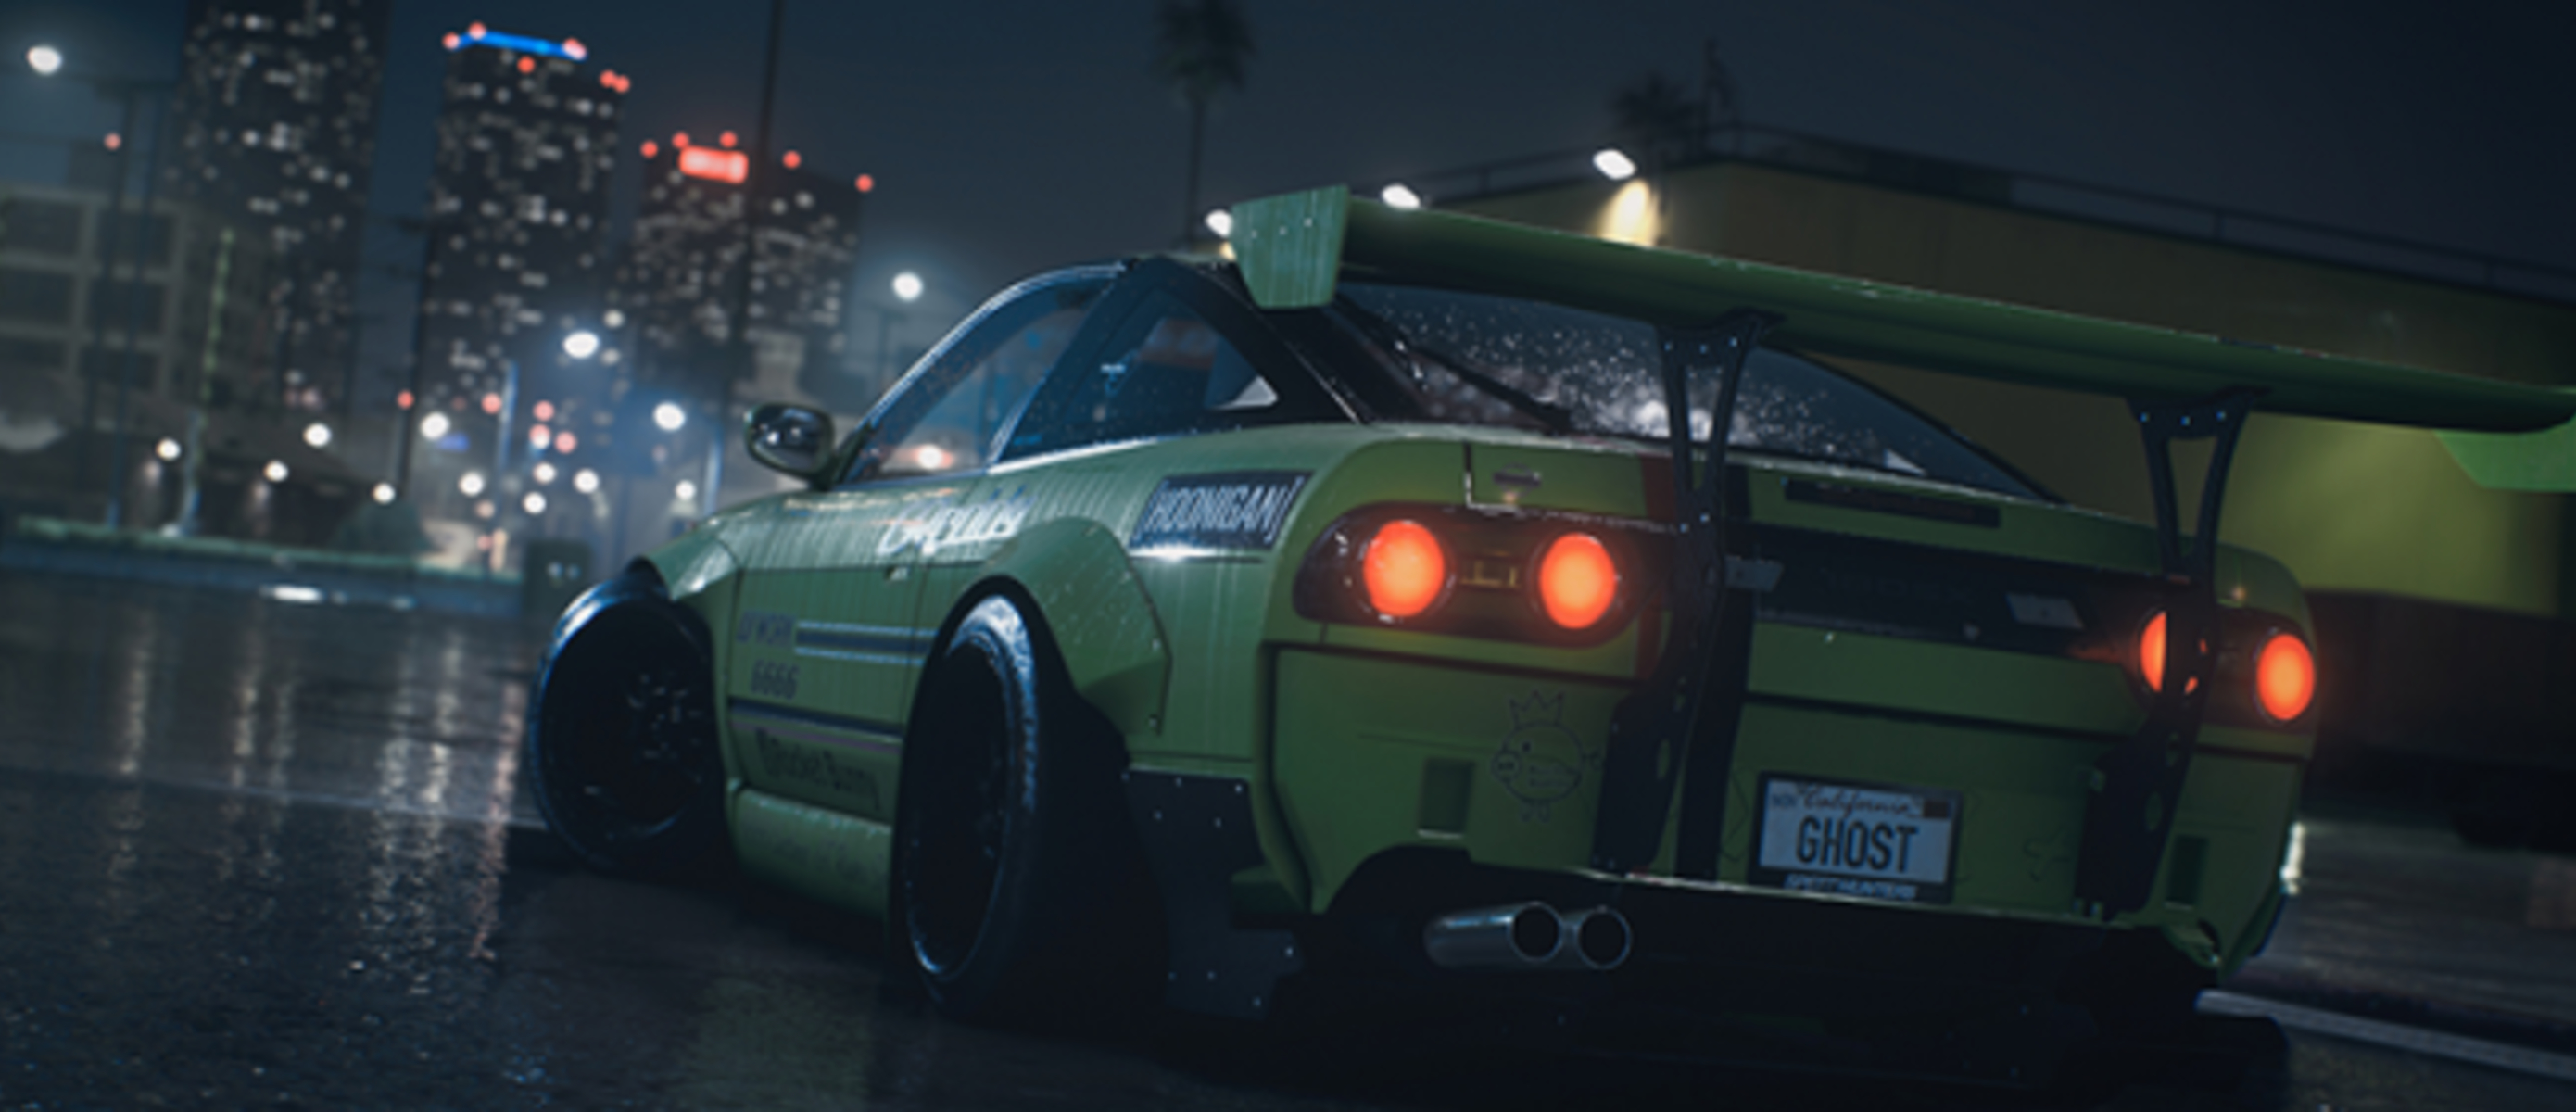 Liked fora. NFS 2015 Nissan 180sx. Nissan 240sx NFS 2015. Nissan 180sx: need for Speed 2016. Nissan 180sx Night.